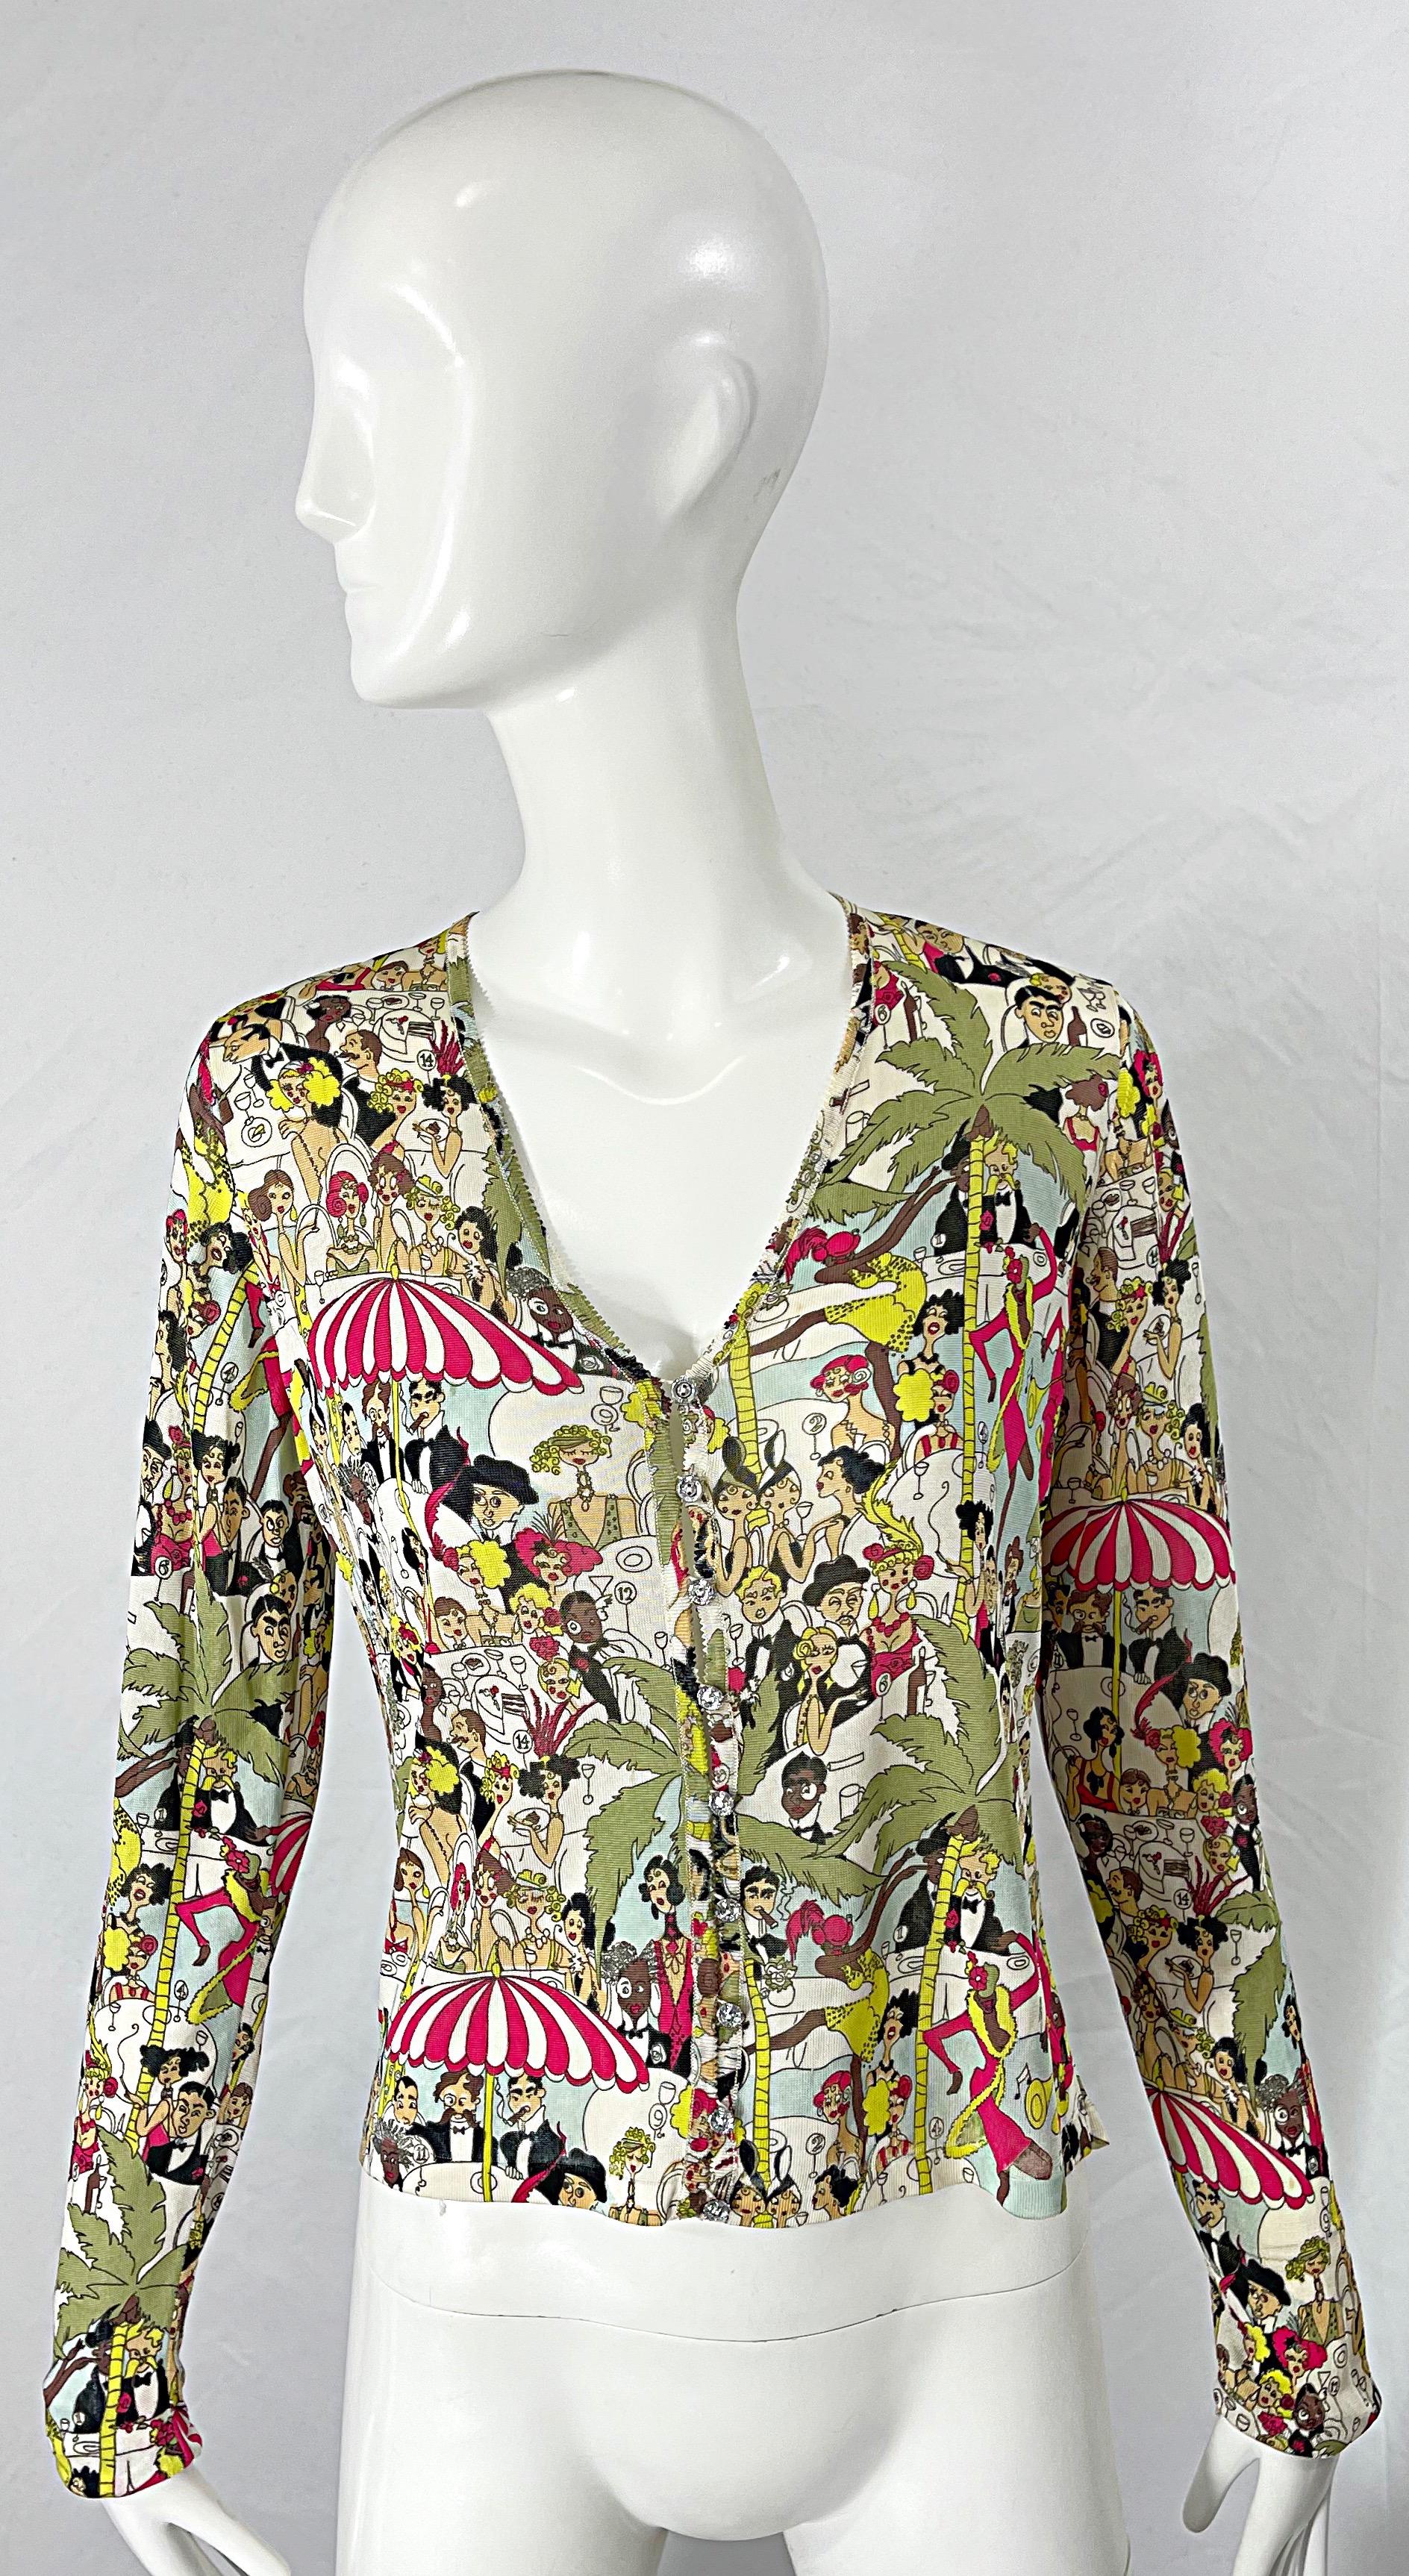 Rare 1990s JOHN GALLIANO Great Gatsby Roarin' 20s novelty print rayon cardigan ! Features rhinestone buttons up the front. Lightweight soft rayon fabric stretches to fit. Can easily be worn layered or alone any time of year. In great conditon 
Made